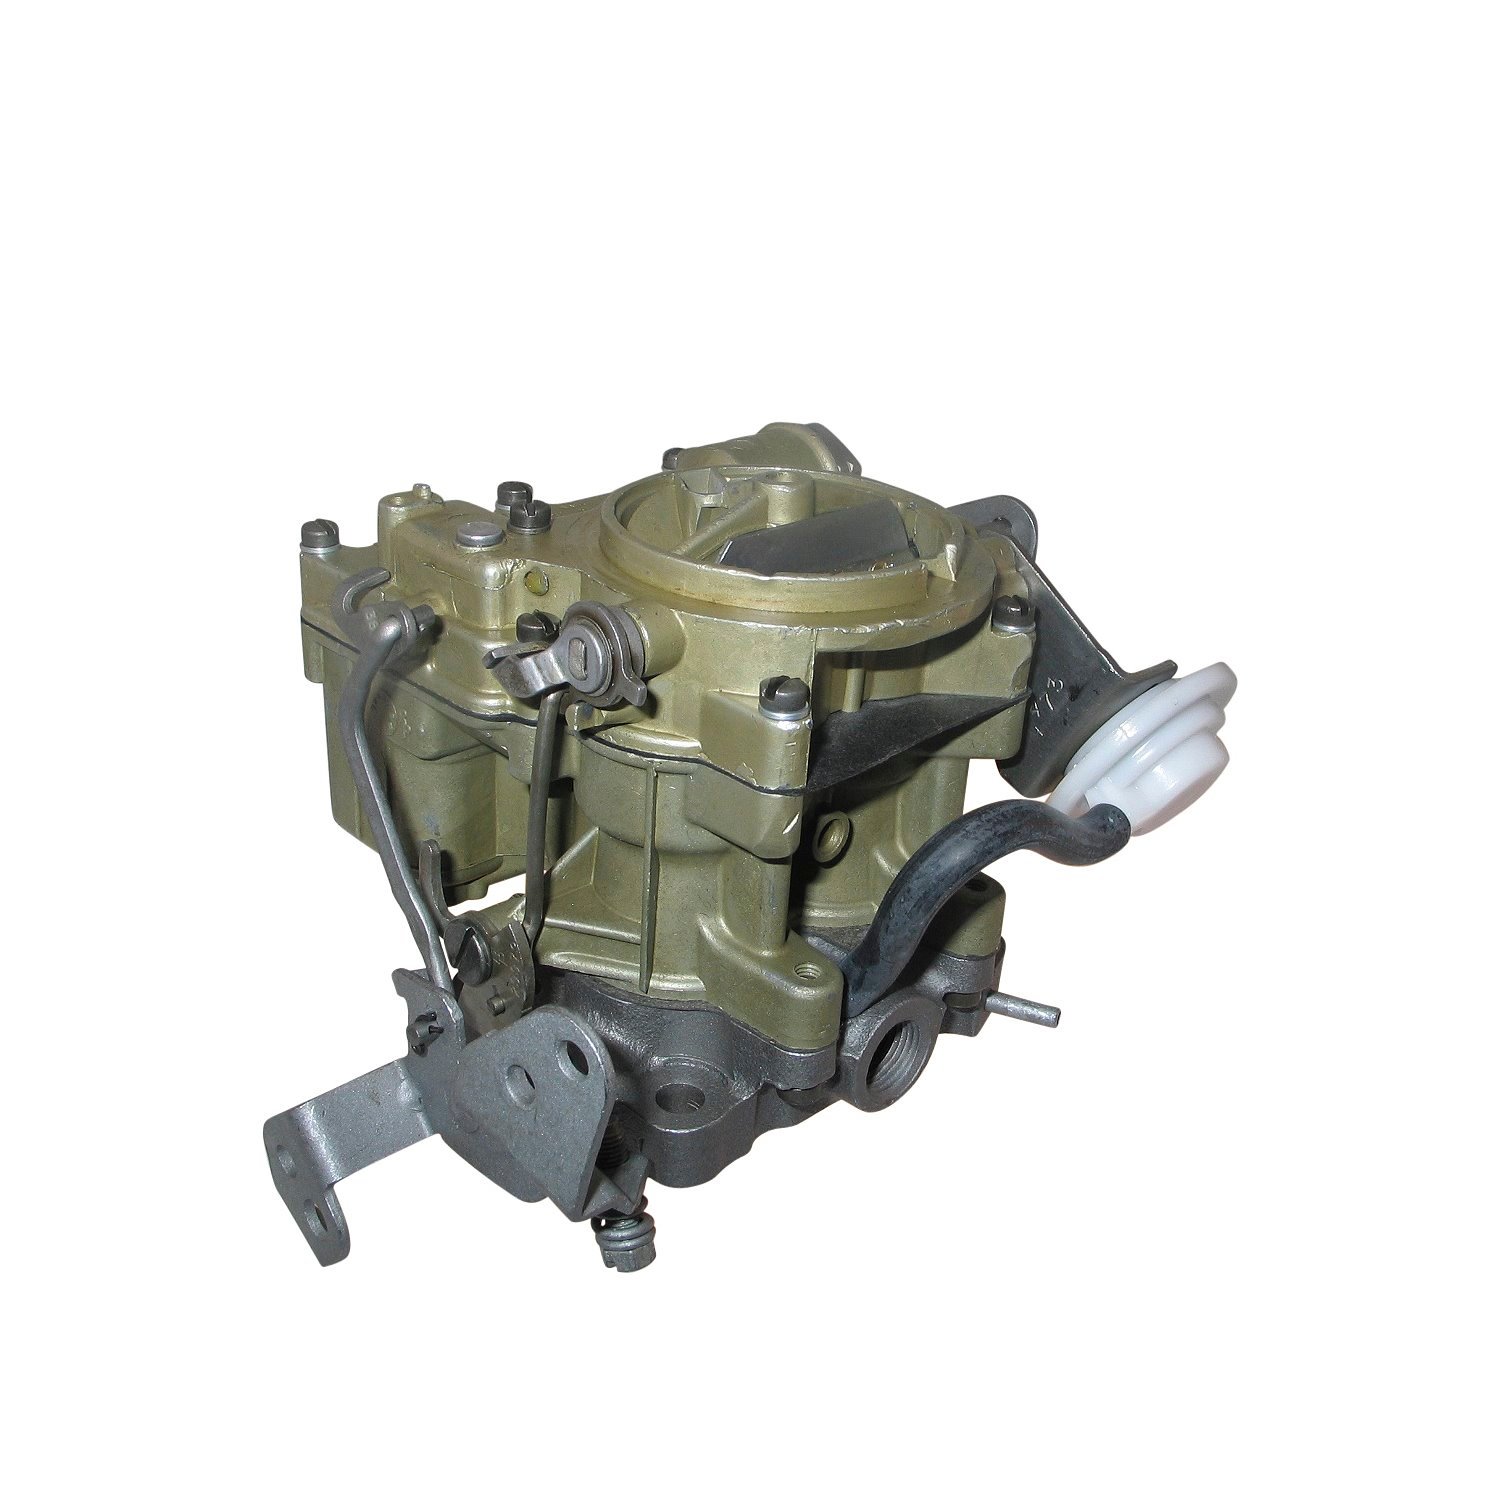 3-3336 Rochester Remanufactured Carburetor, 2GV-Style